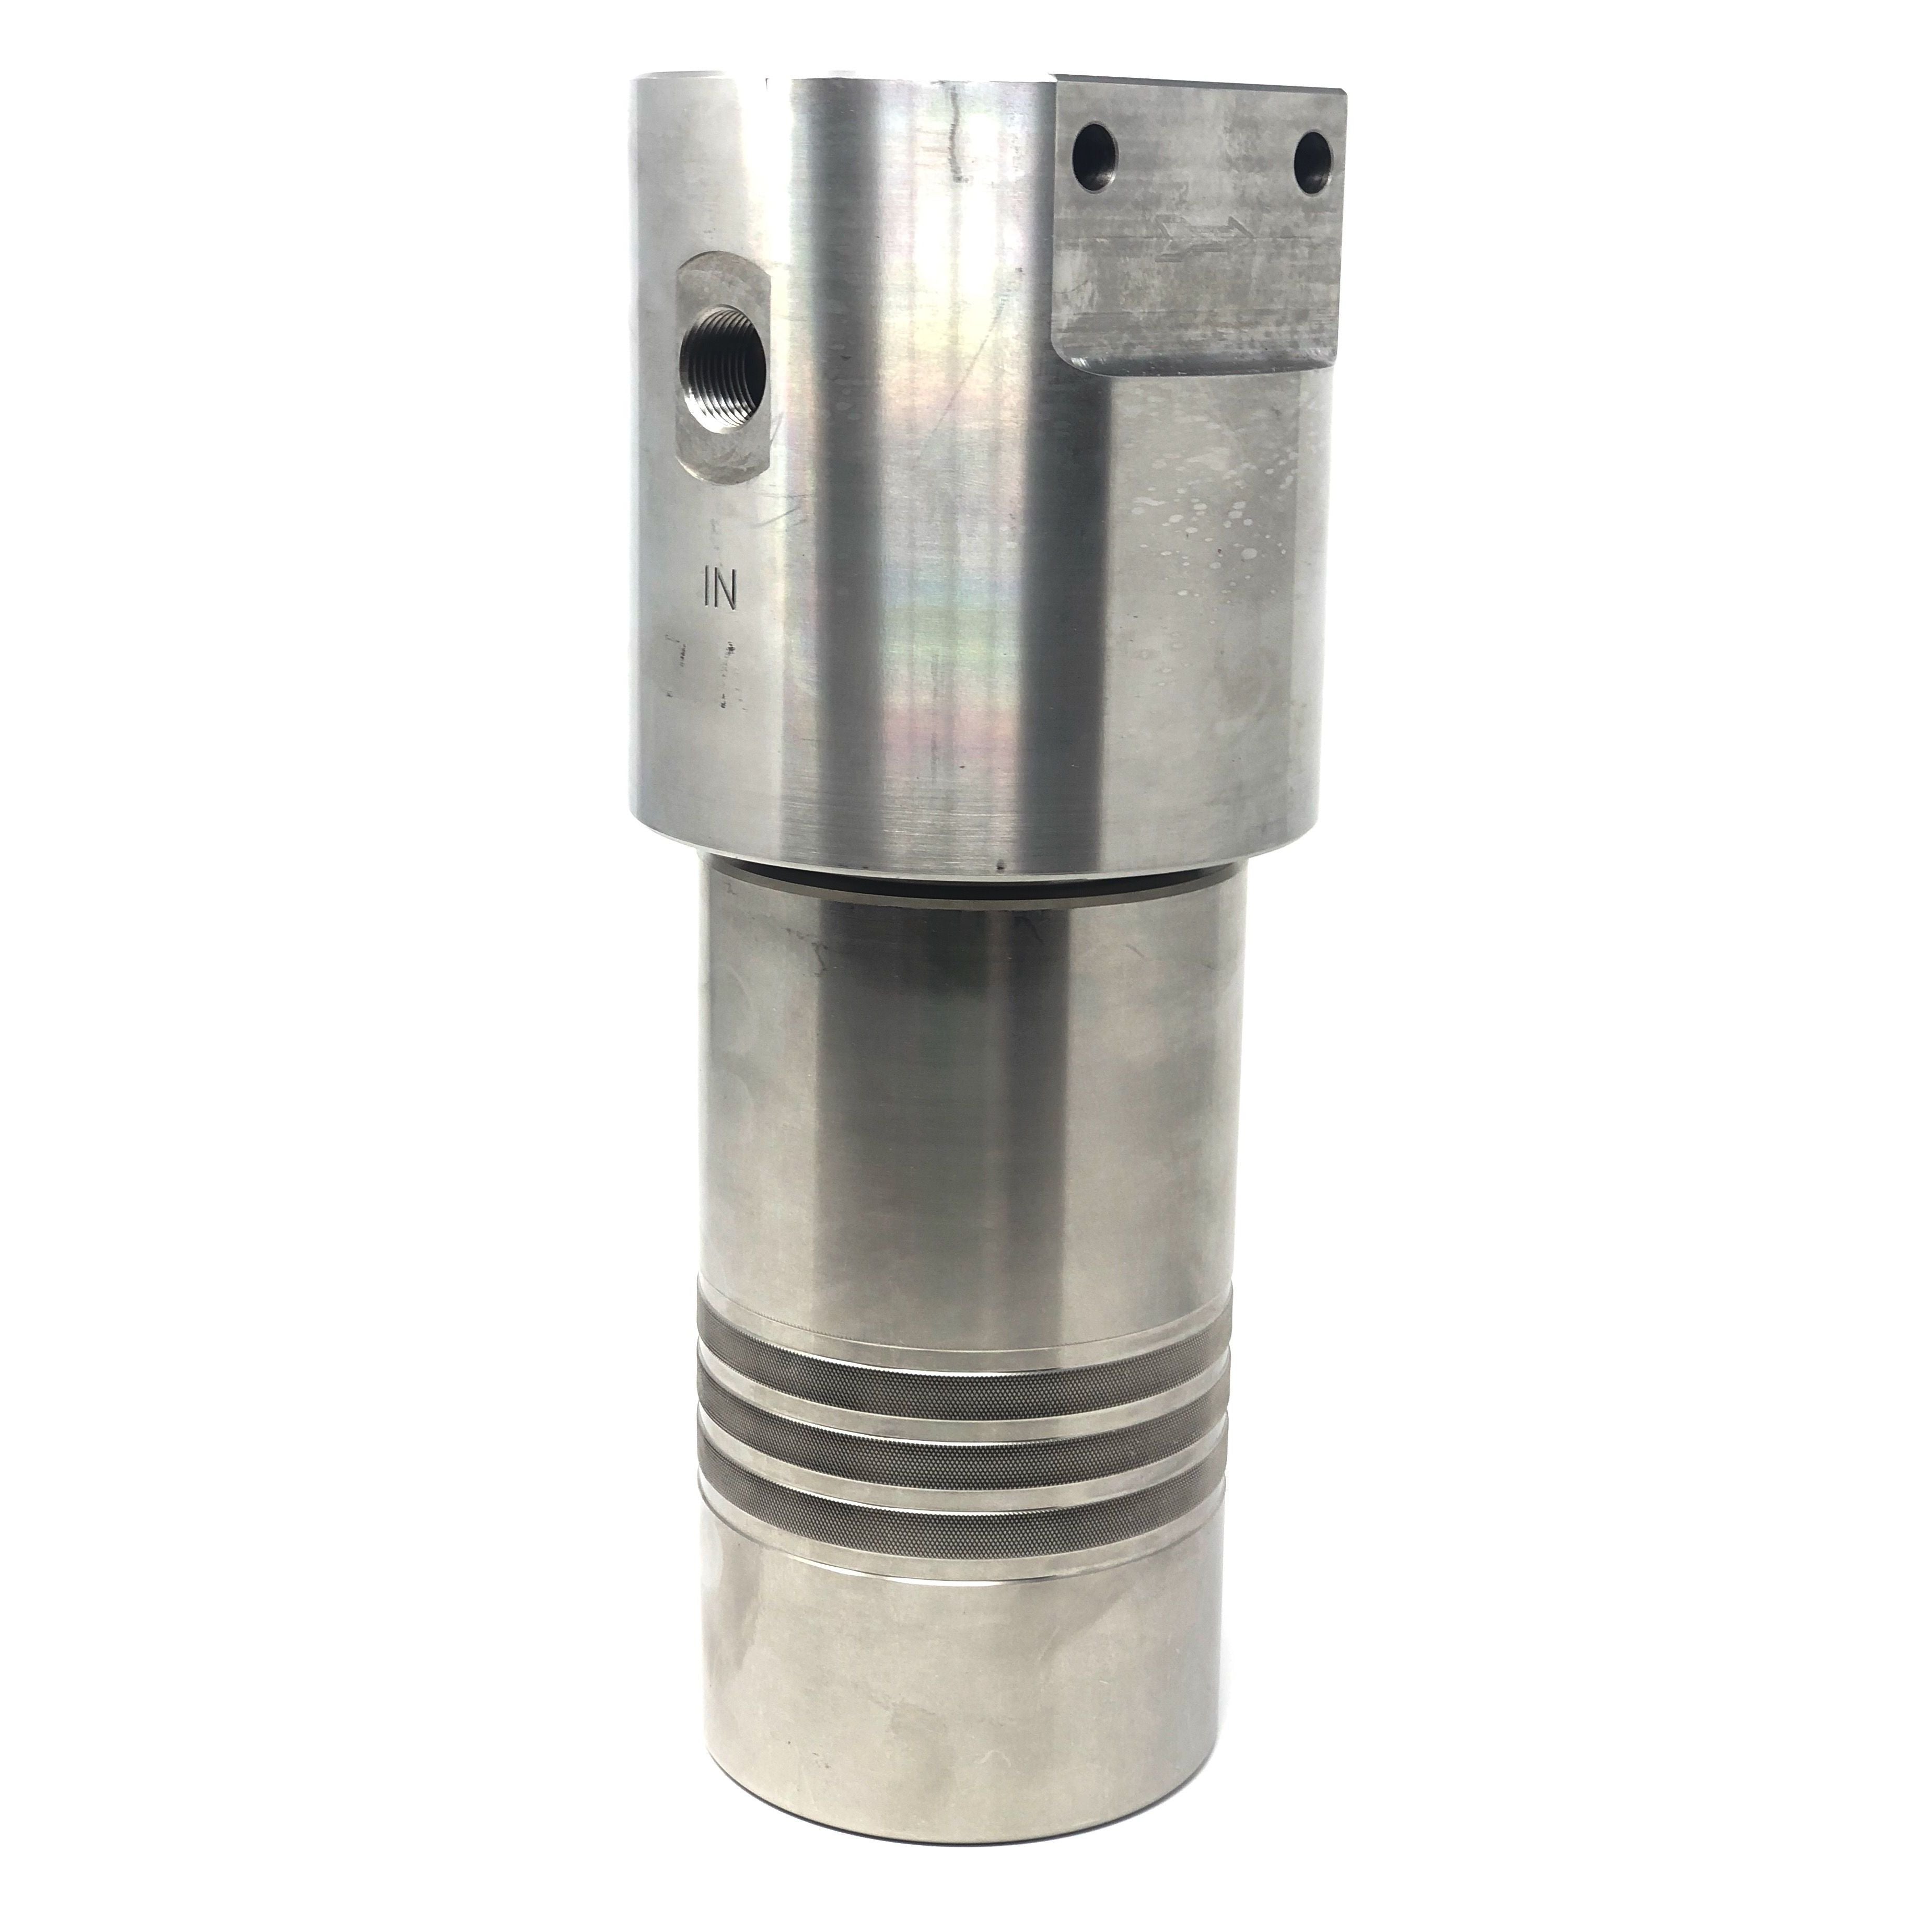 52S-246S-40SEN : Chase Ultra High Pressure Inline Filter, 10000psi, #6 SAE (3/8"), 40 Micron, With Visual Indicator, No Bypass